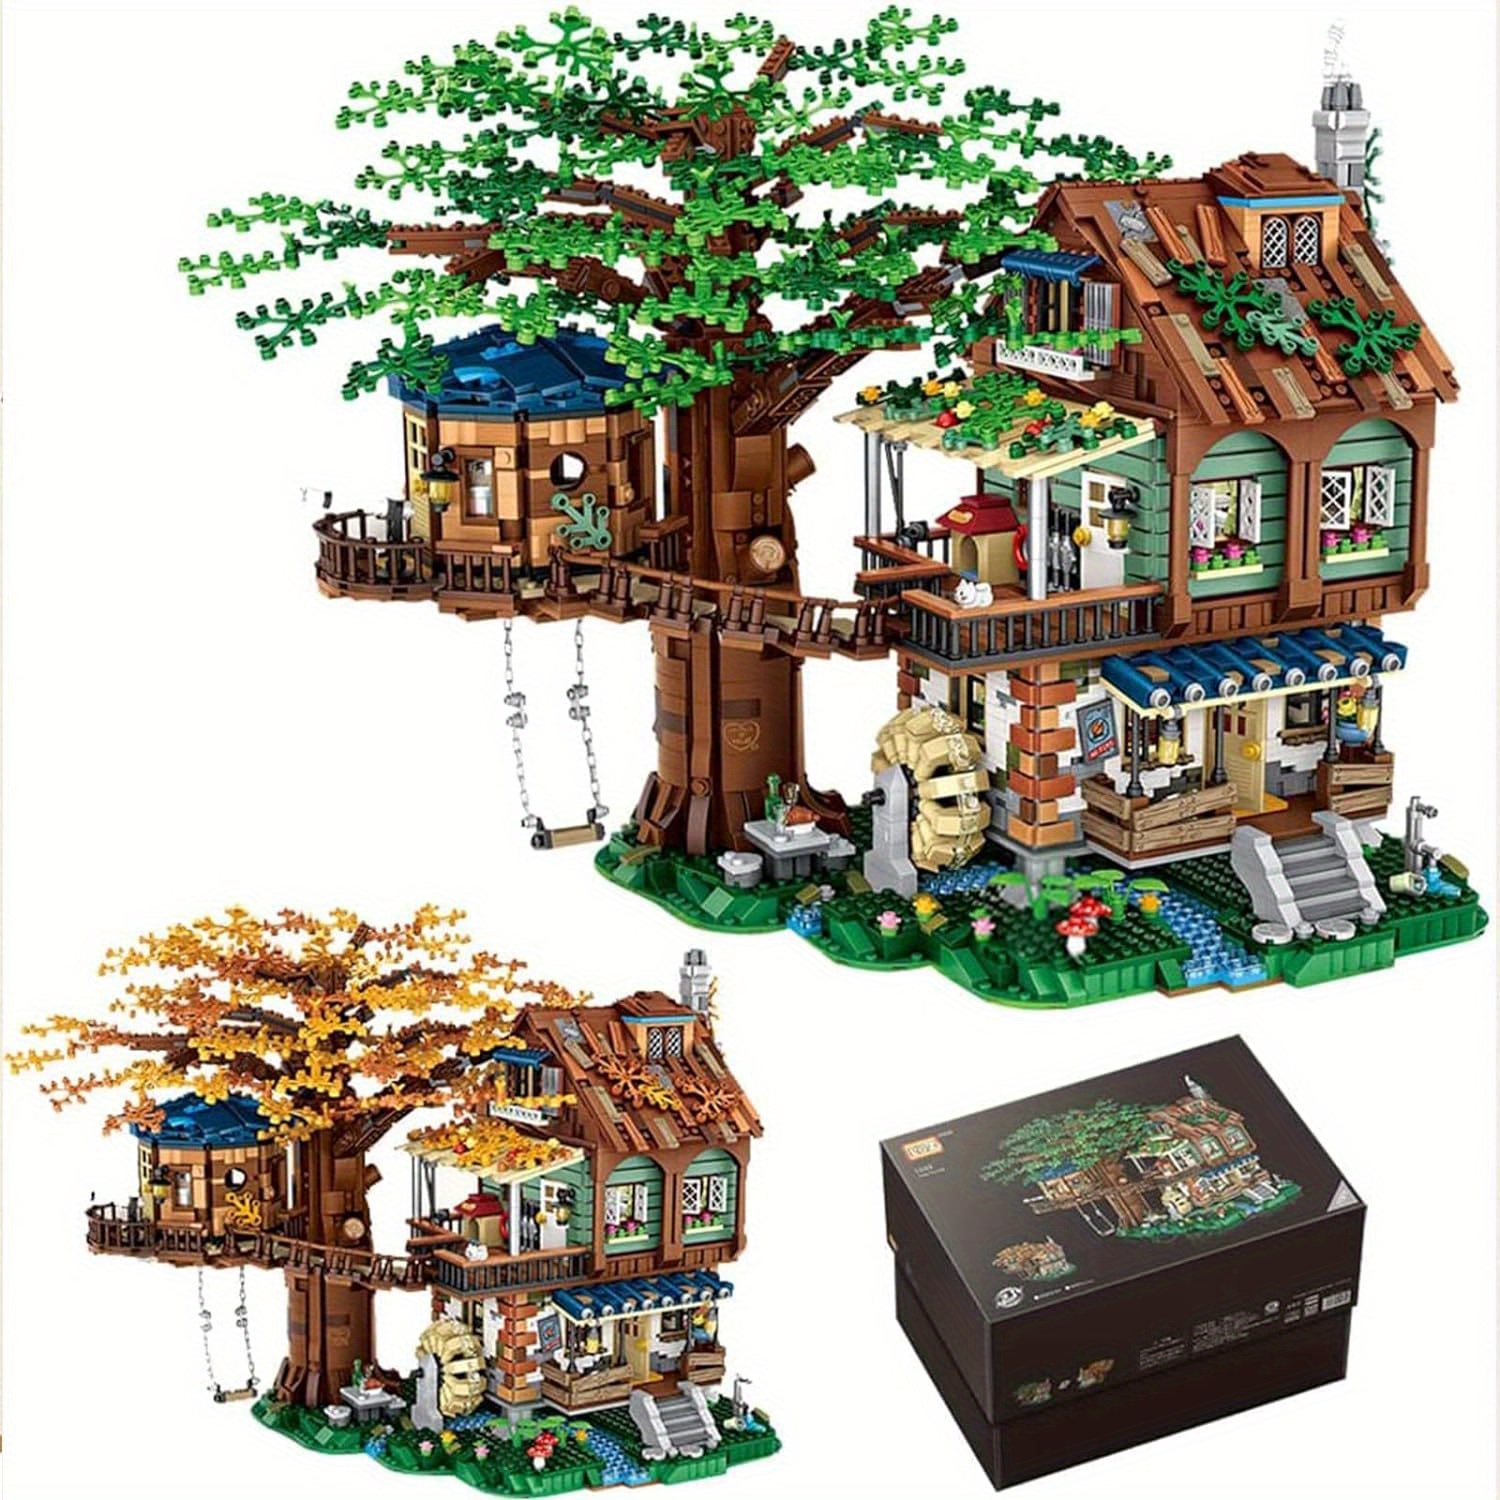 

Idea Tree House Bricks Model Toys Set, Diy Forest House Mini Building Blocks Street View Sets, For Teens Boys Girls/adults Ages 14+ Tree House Display (4761 Pcs Tree House)